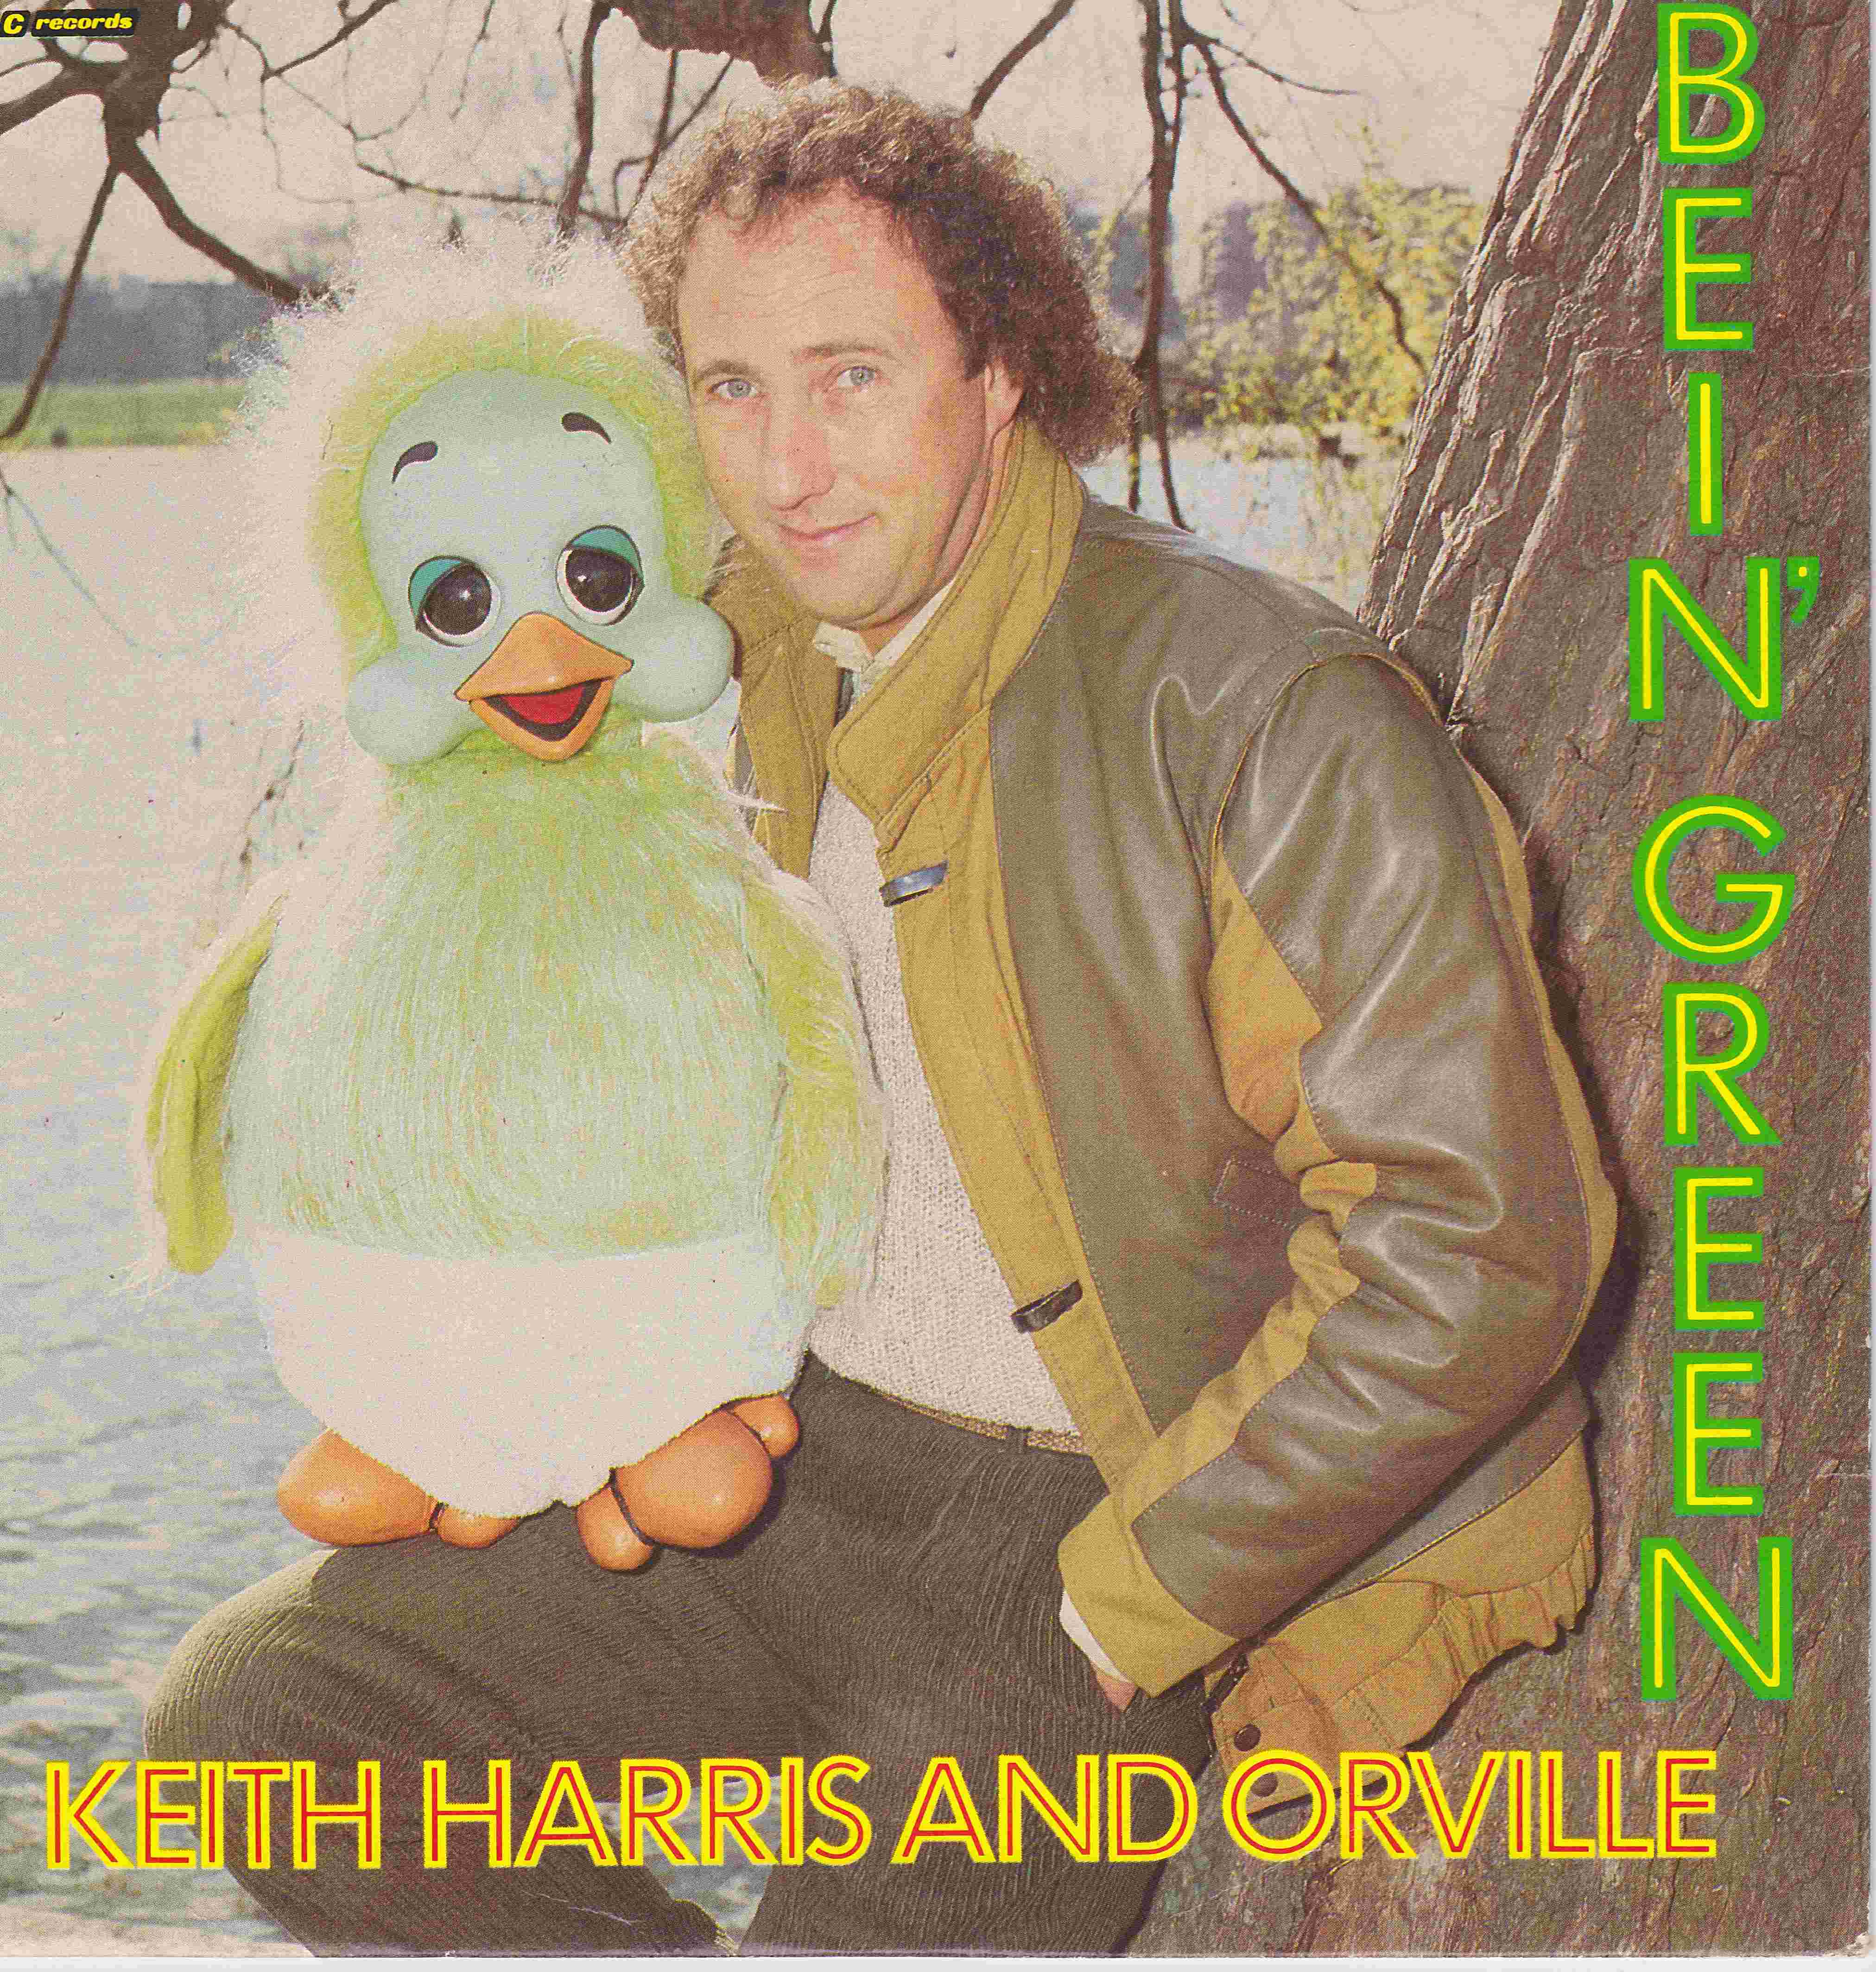 Picture of RESL 145 Bein' green by artist Keith Harris and Orville / Arr. Nigel Hess / Bobby Crush from the BBC singles - Records and Tapes library